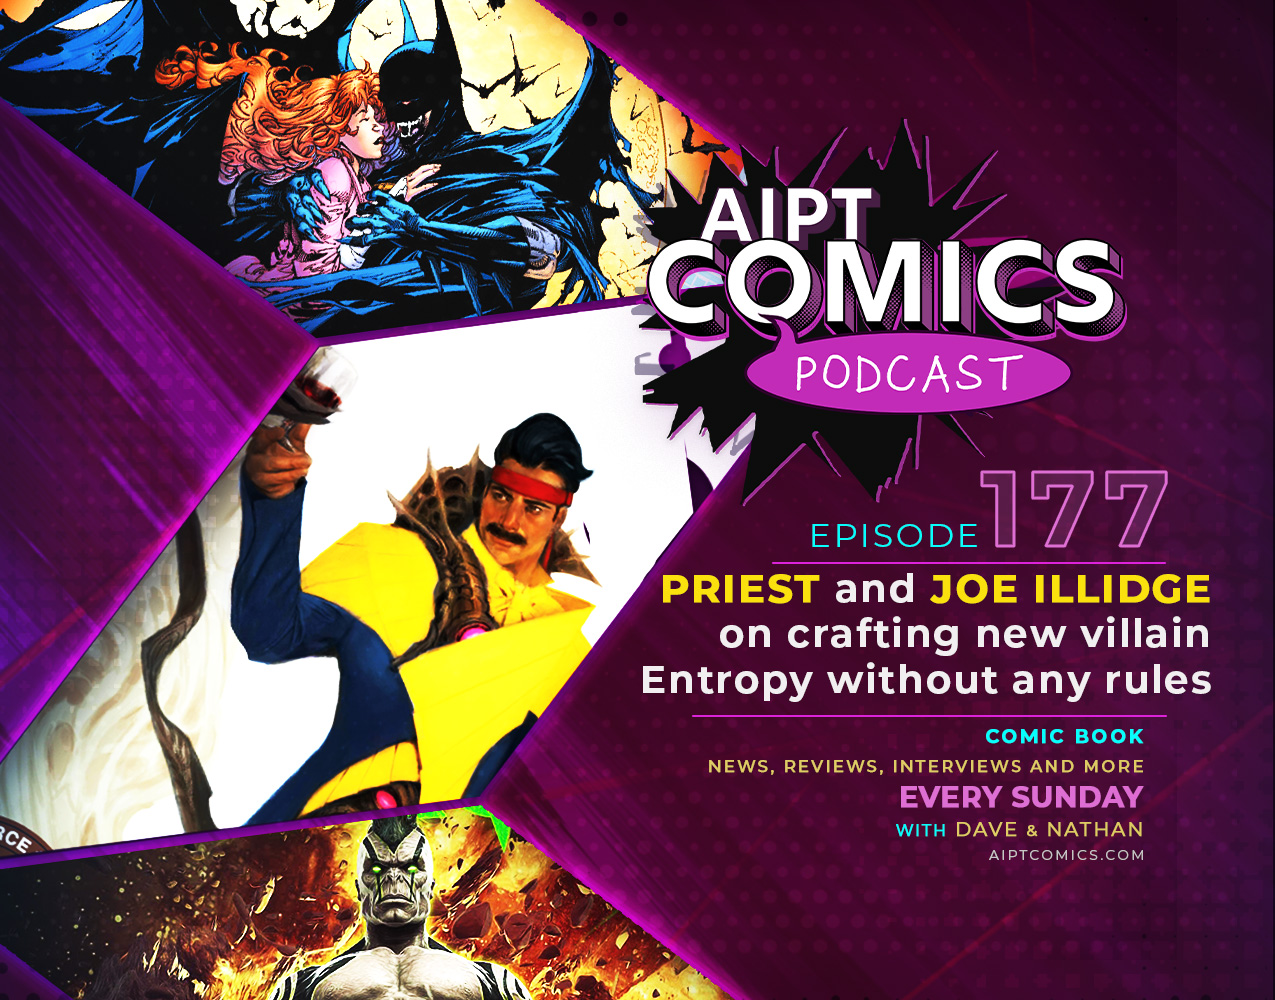 AIPT Comics podcast episode 177: Christopher Priest and Joe Illidge on crafting new villain Entropy without any rules